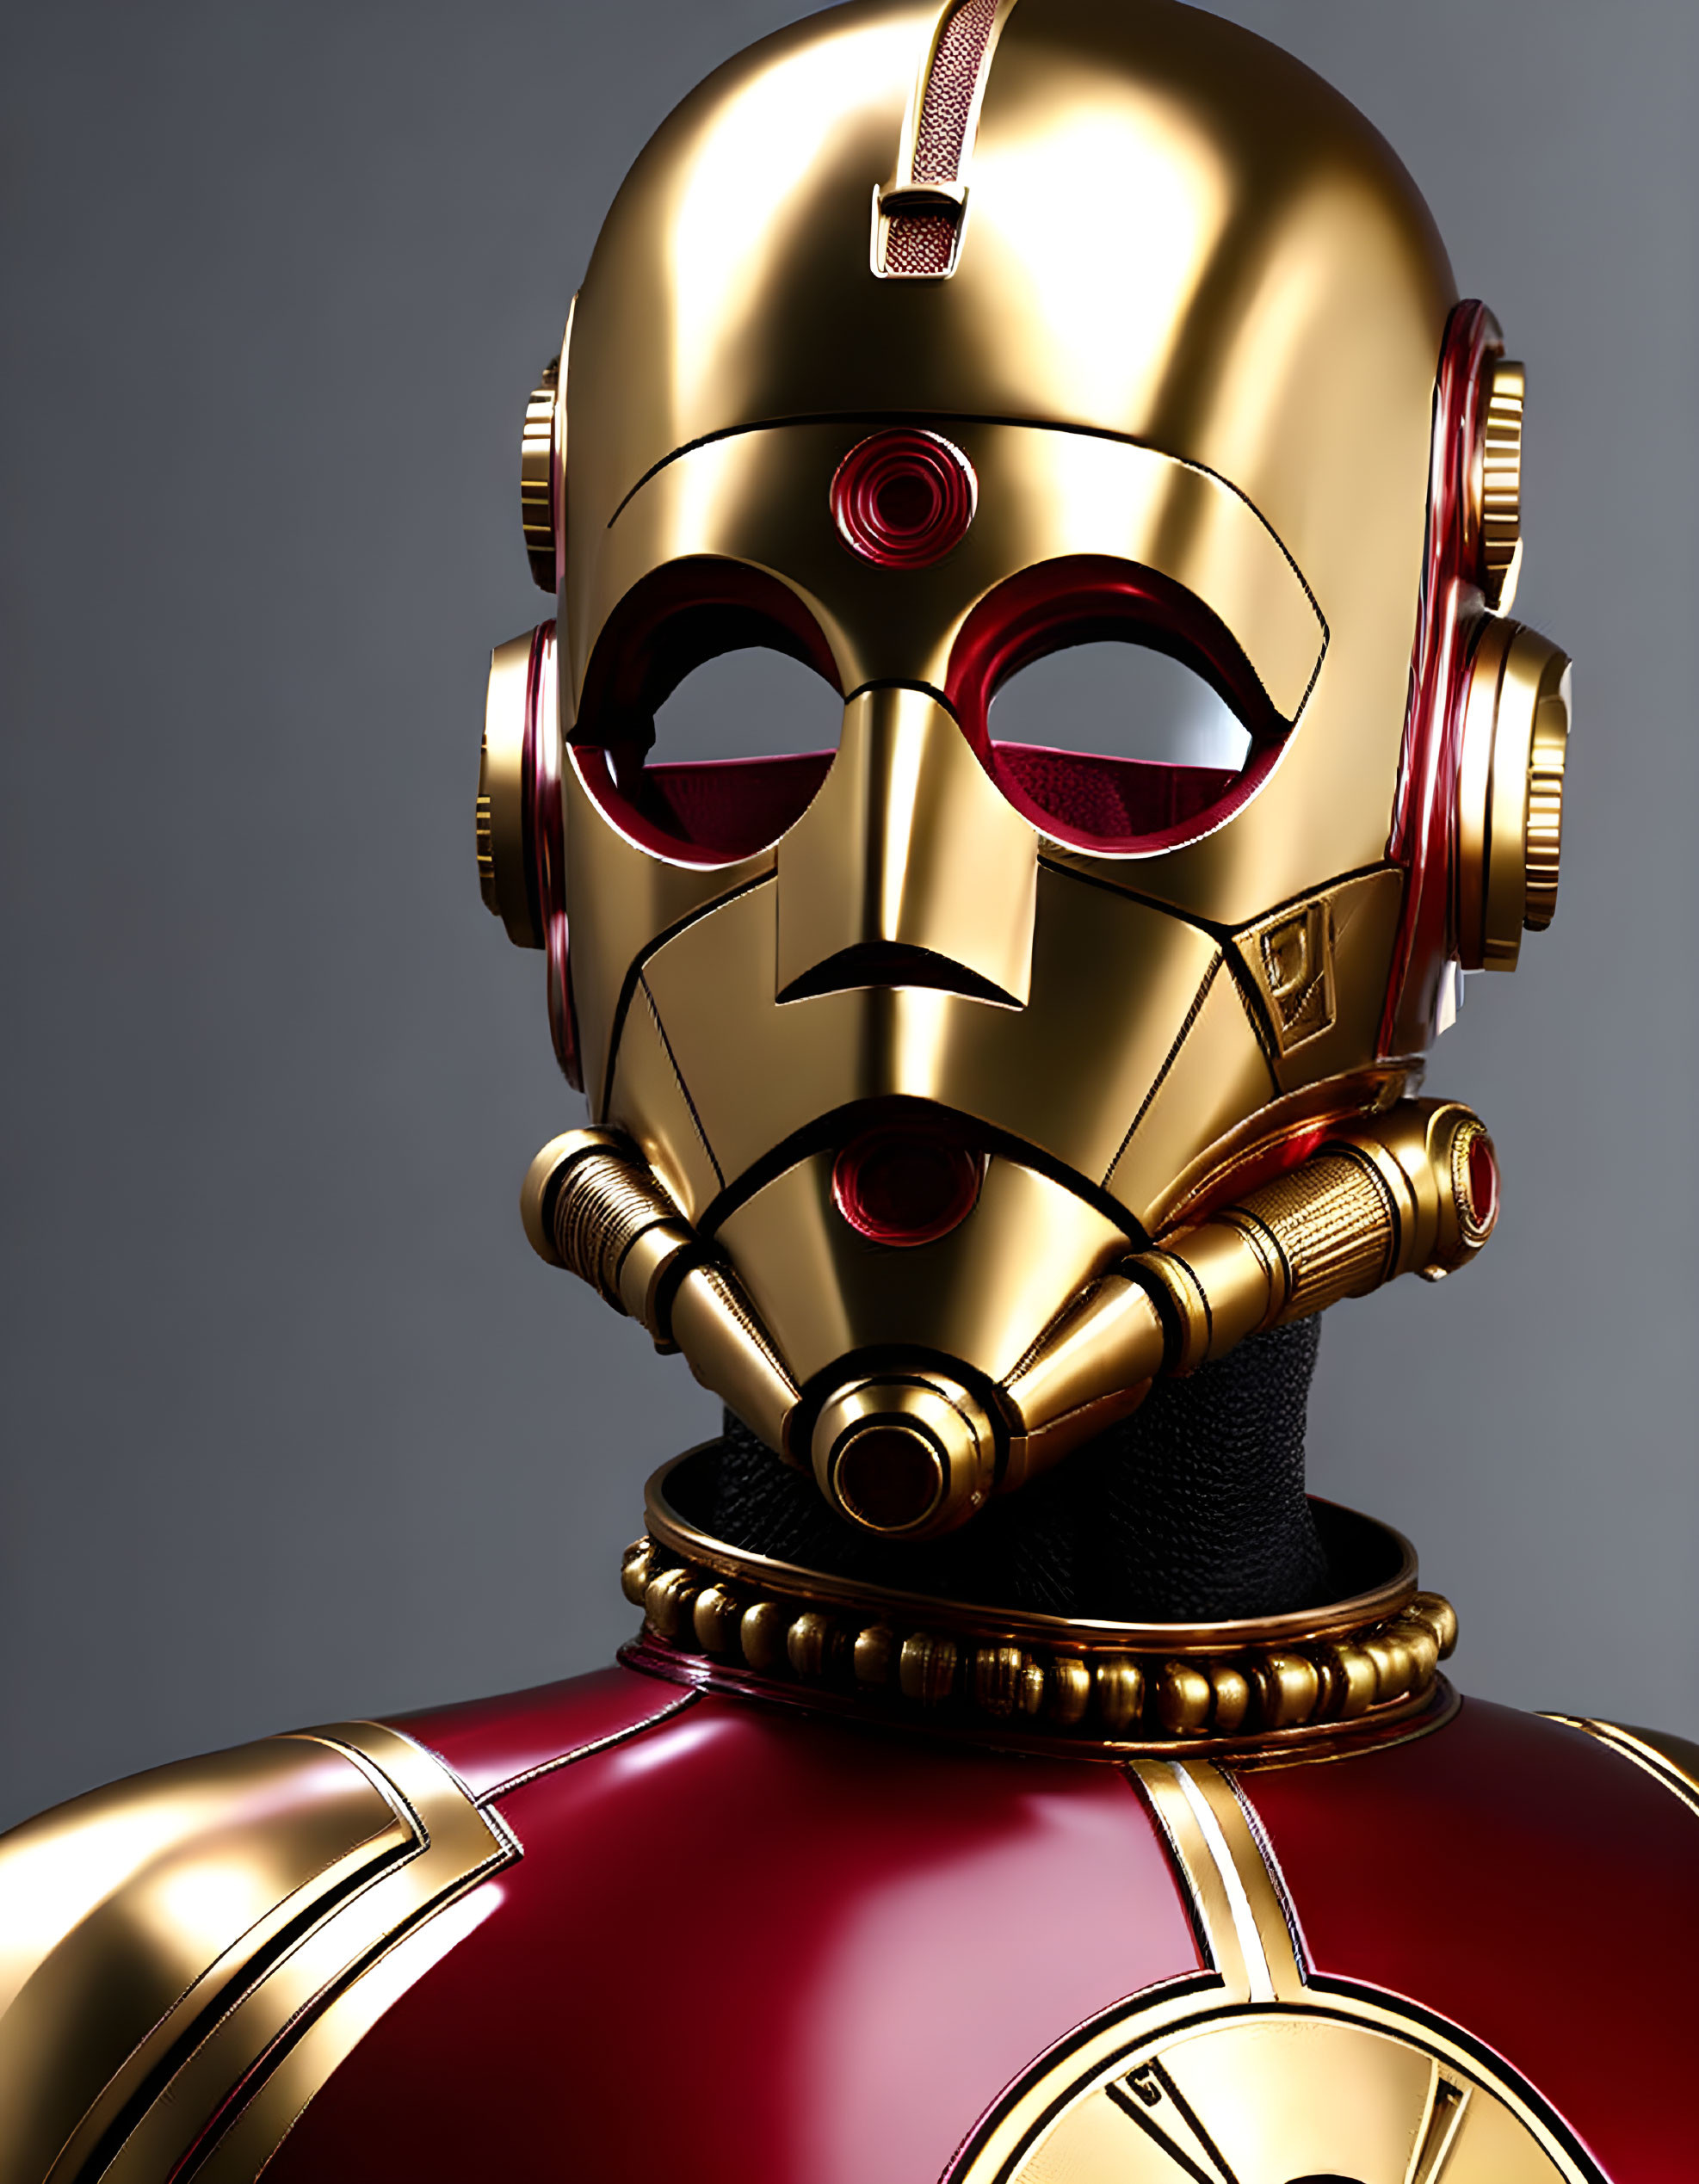 Detailed Gold and Red Humanoid Robot Head on Grey Background